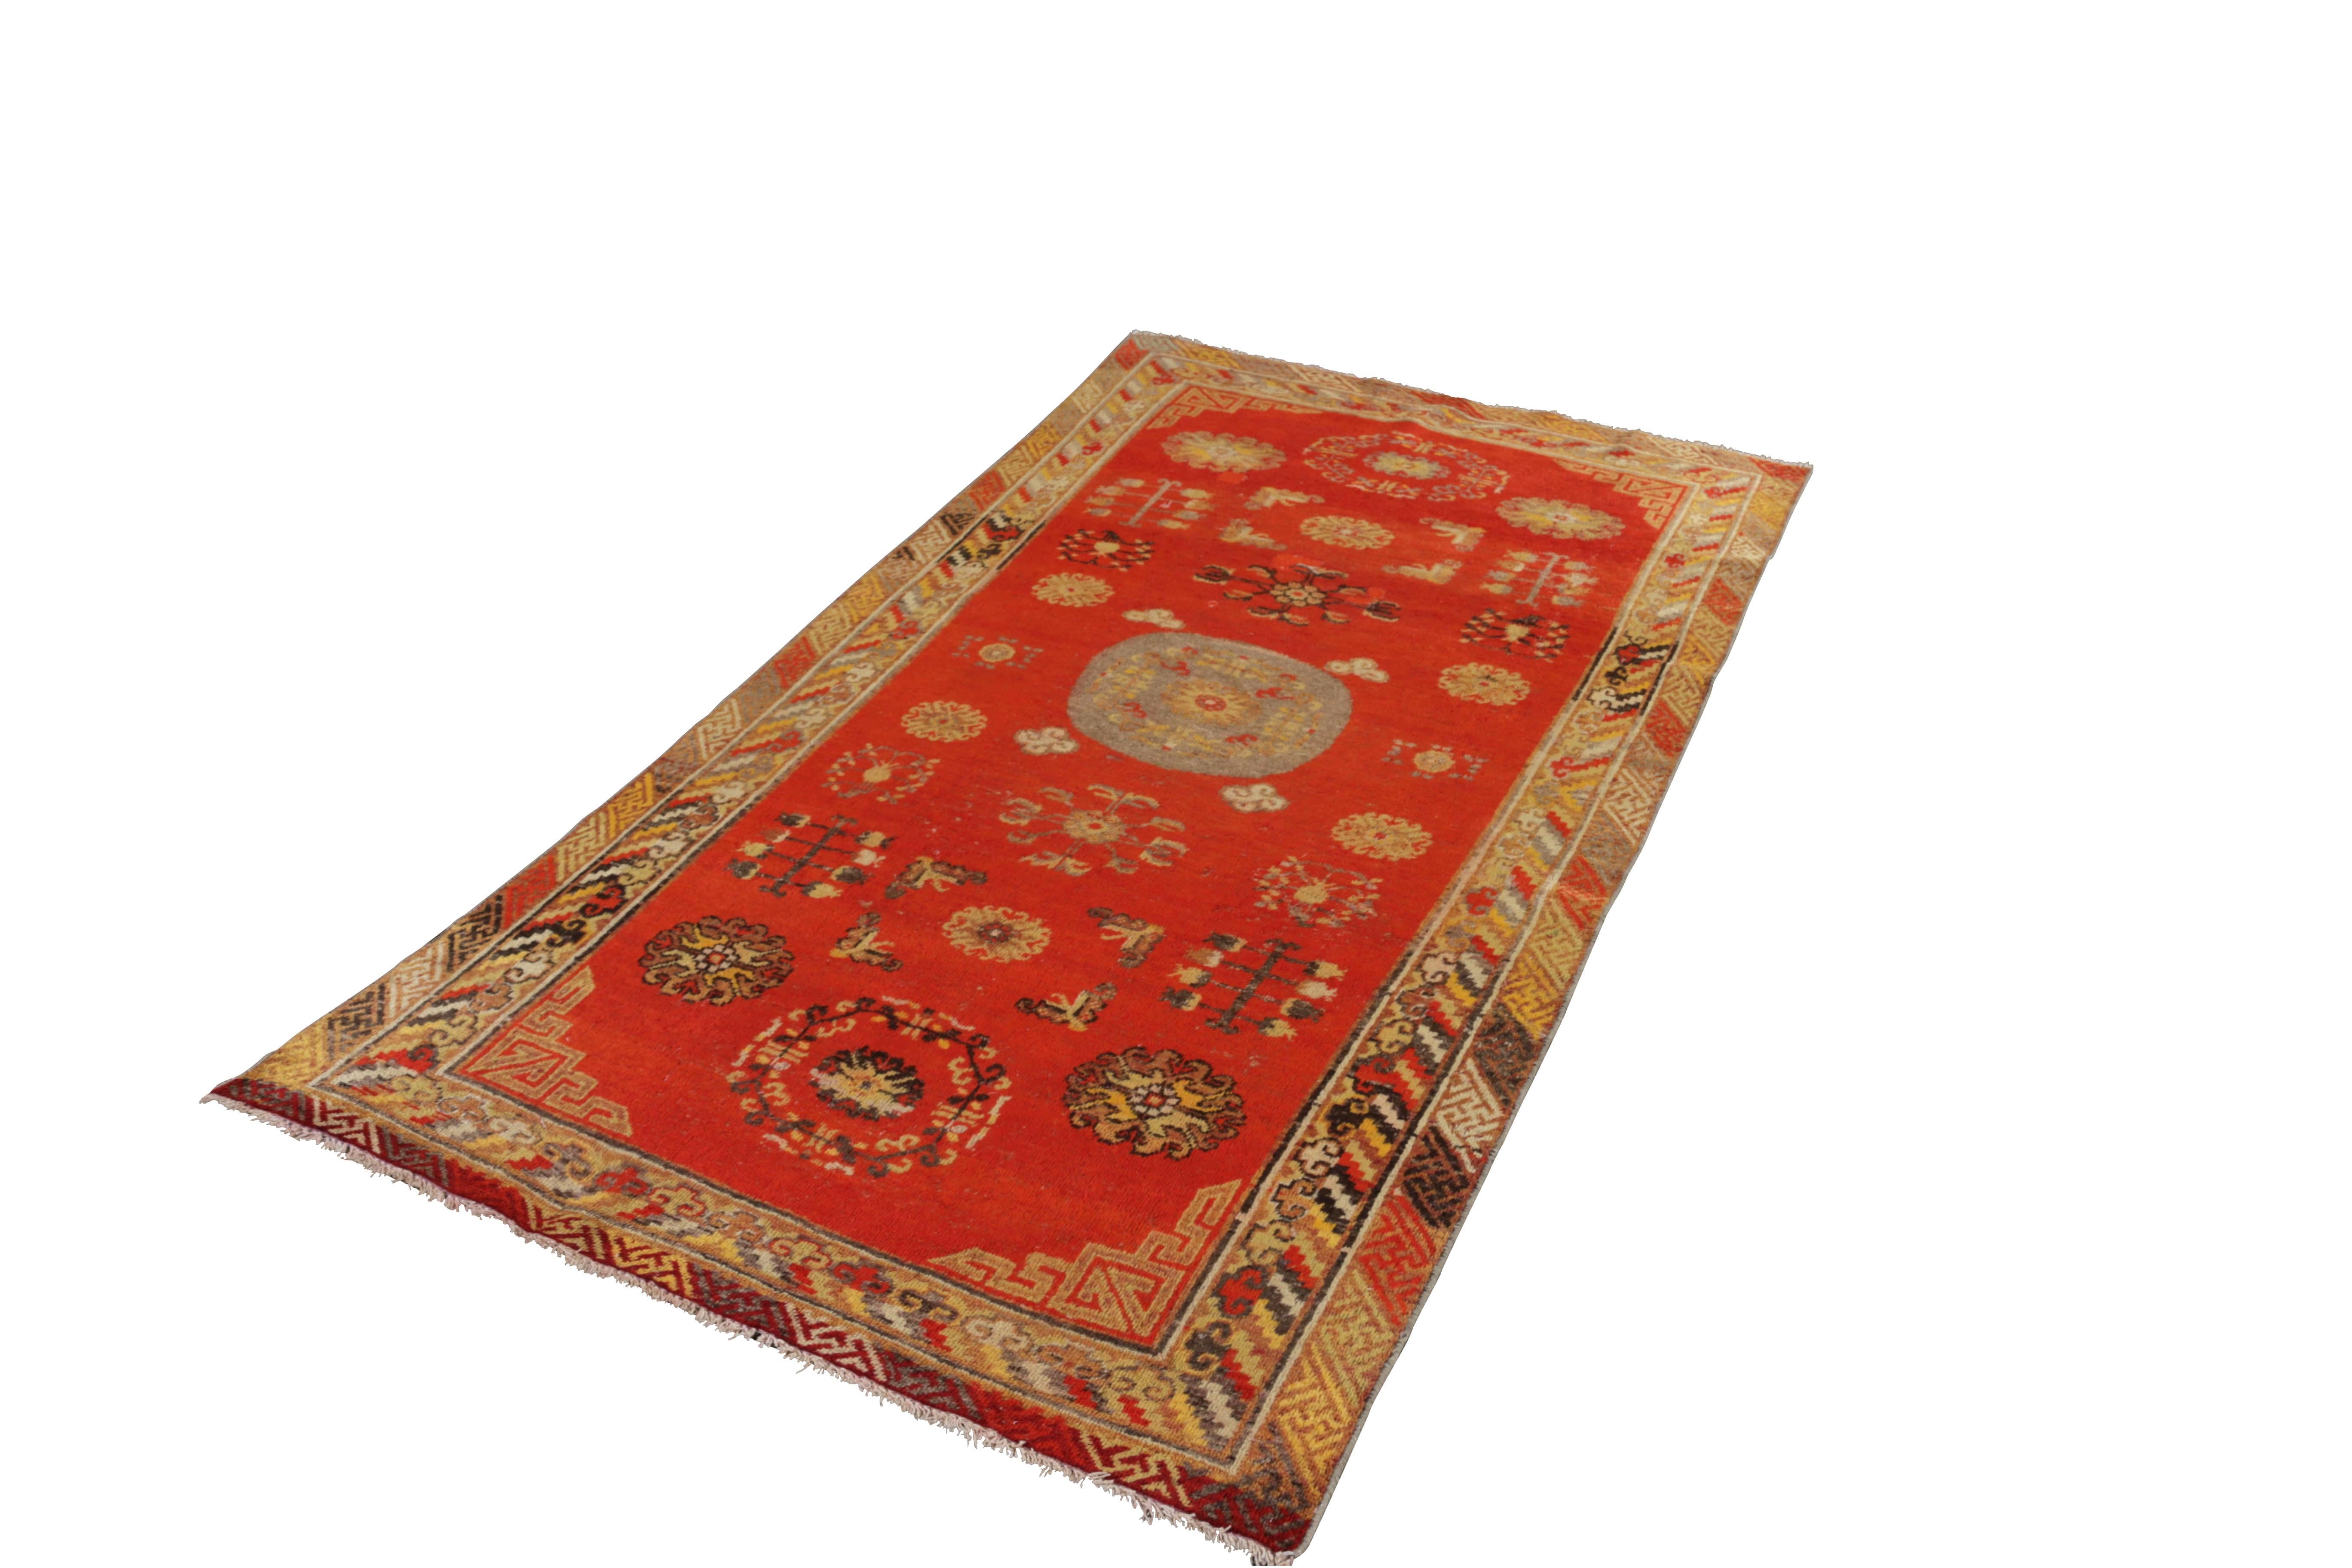 Hand knotted in wool originating from East Turkestan circa 1890-1900, this antique rug connotes a Classic Khotan rug design with a Classic approach to transitional colorway celebrated in this Oriental rug family. Favoring the cloudband pattern in